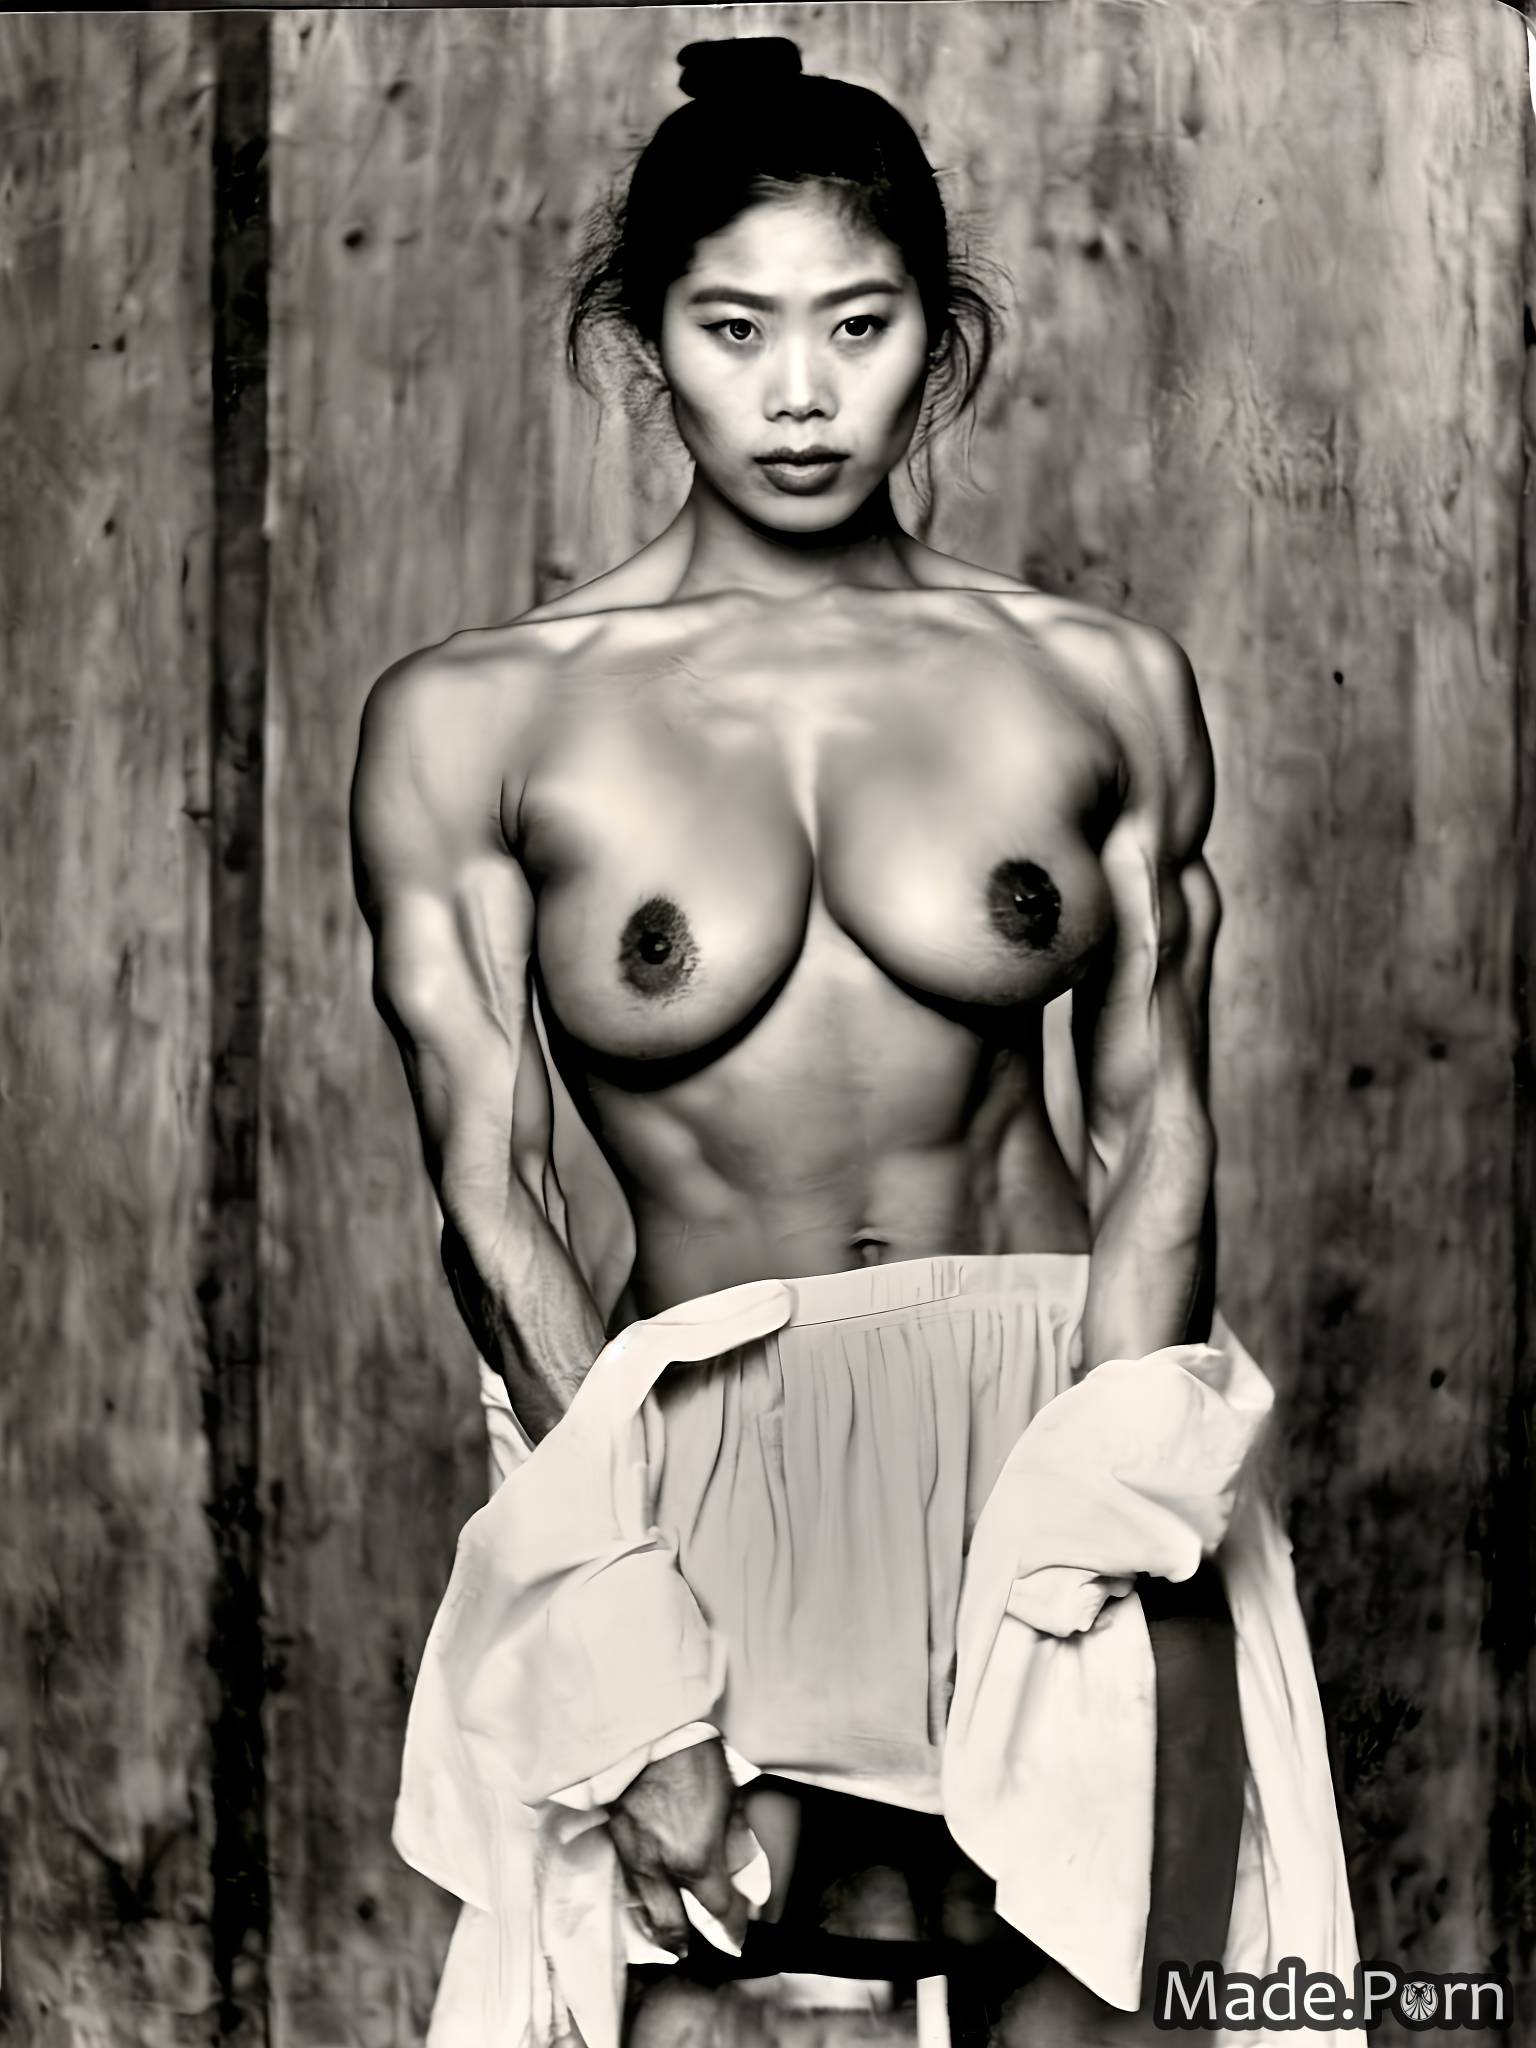 Vintage Korean Porn - Porn image of working out 20 nude korean top knot hair military Vintage  bodybuilder created by AI